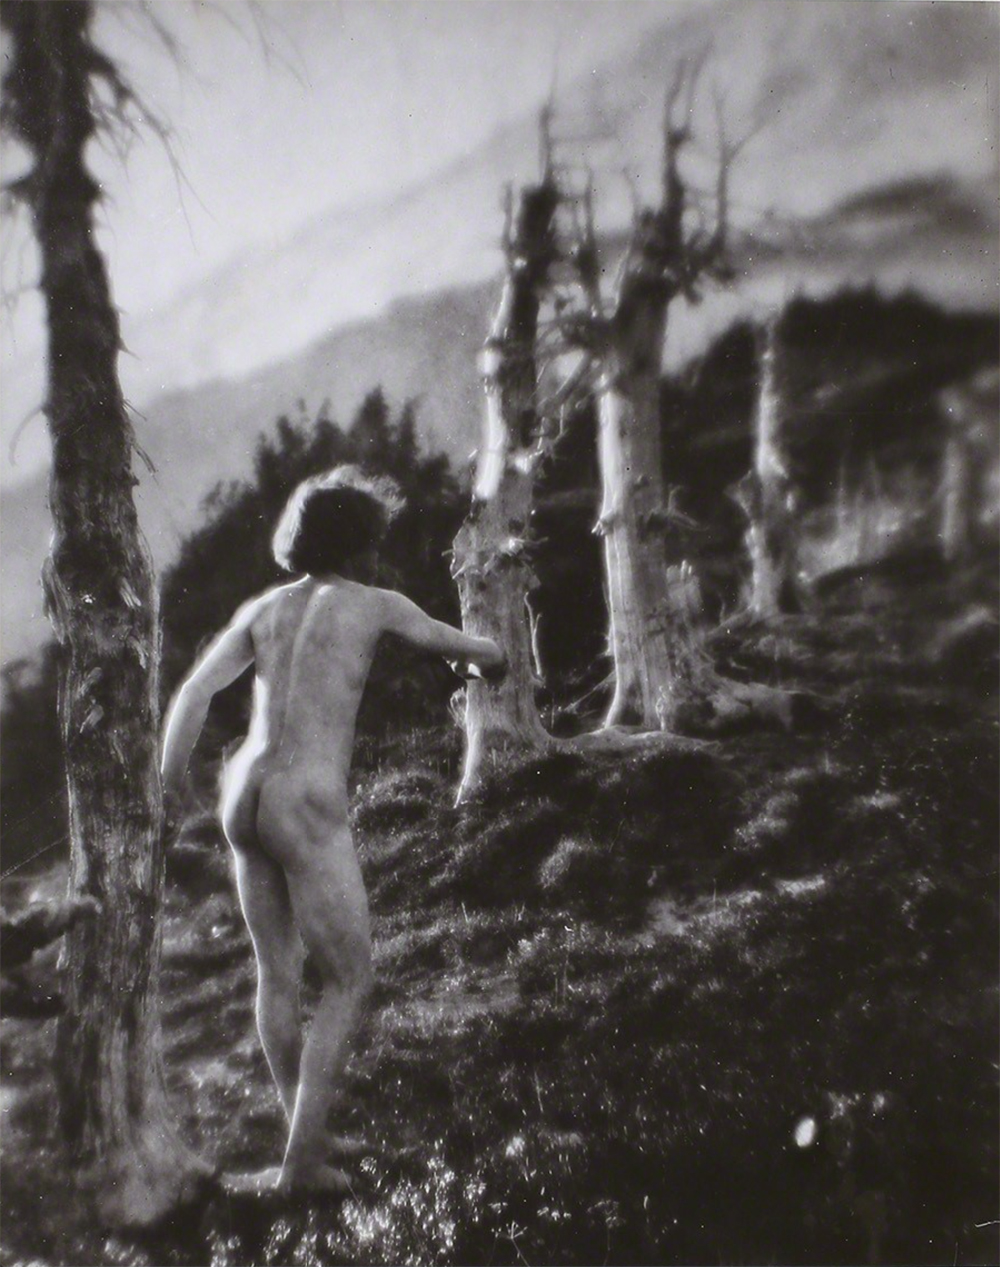 Imogen Cunningham, Roi on the Move, 1915, signed gelatin silver print, 10 x 8 inches, price on request